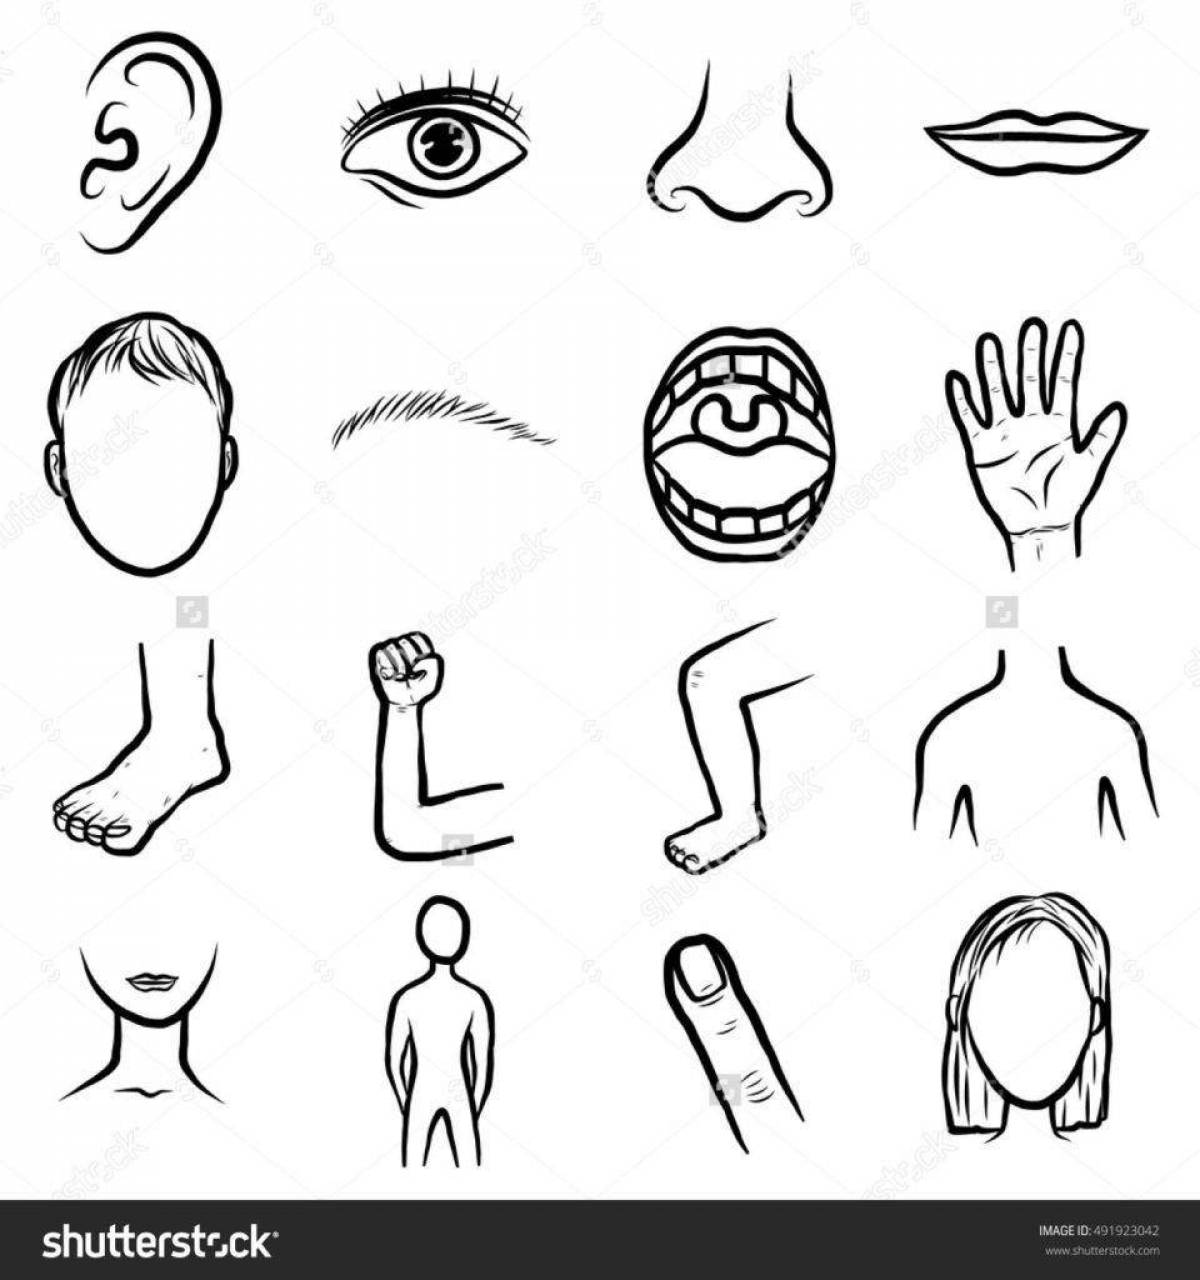 Exciting parts of a face coloring page for kids